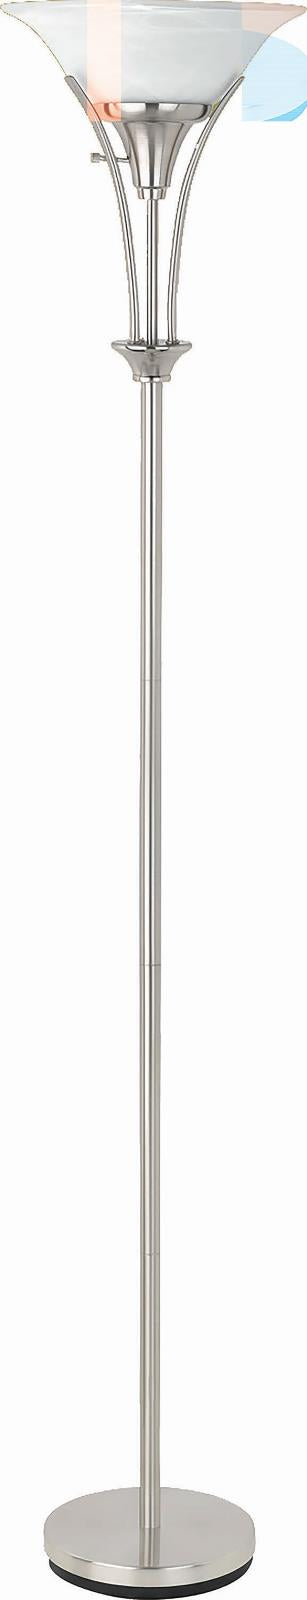 Transitional Silver Floor Lamp image